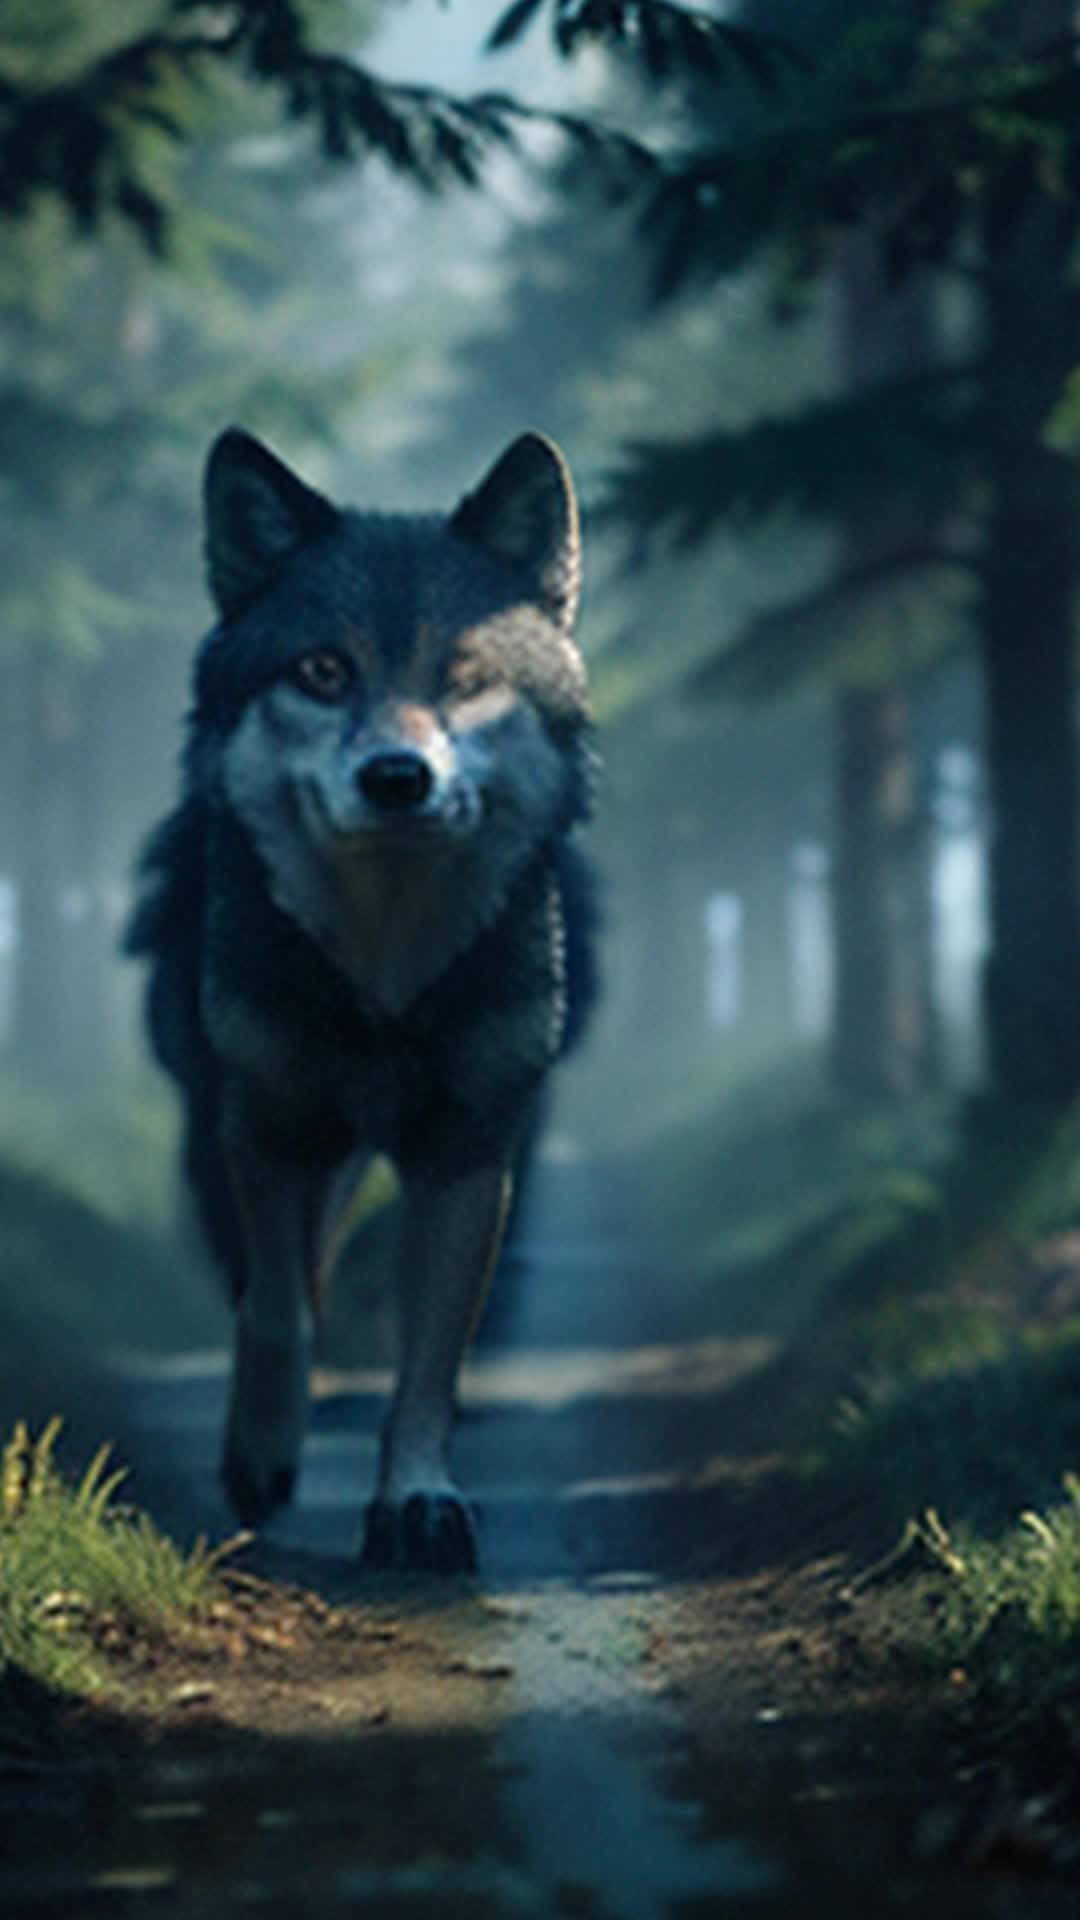 Edge of dense forest, Okami wolf giving soft, enigmatic glance backward, vanishing into morning mist, leaving trail of whispered legends, saved wanderers watching